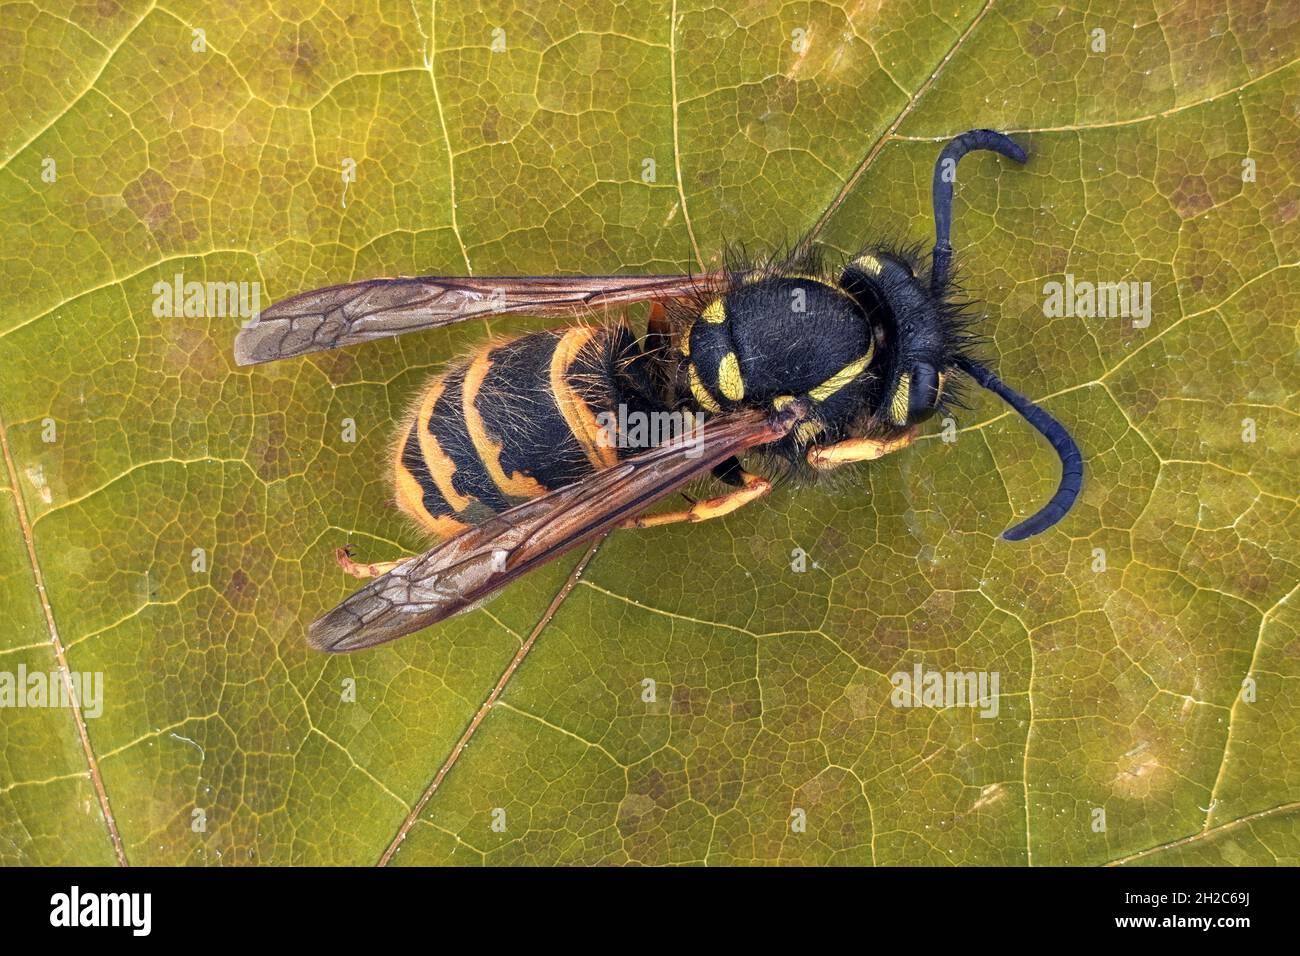 A wasp, Schneider Kreuznach Componon lens 4 / 40mm, aperture 8.0, camera Sony A 6400, exposure 1/25 second, ISO-100. 185 photos. Scale 1: 1 Stock Photo